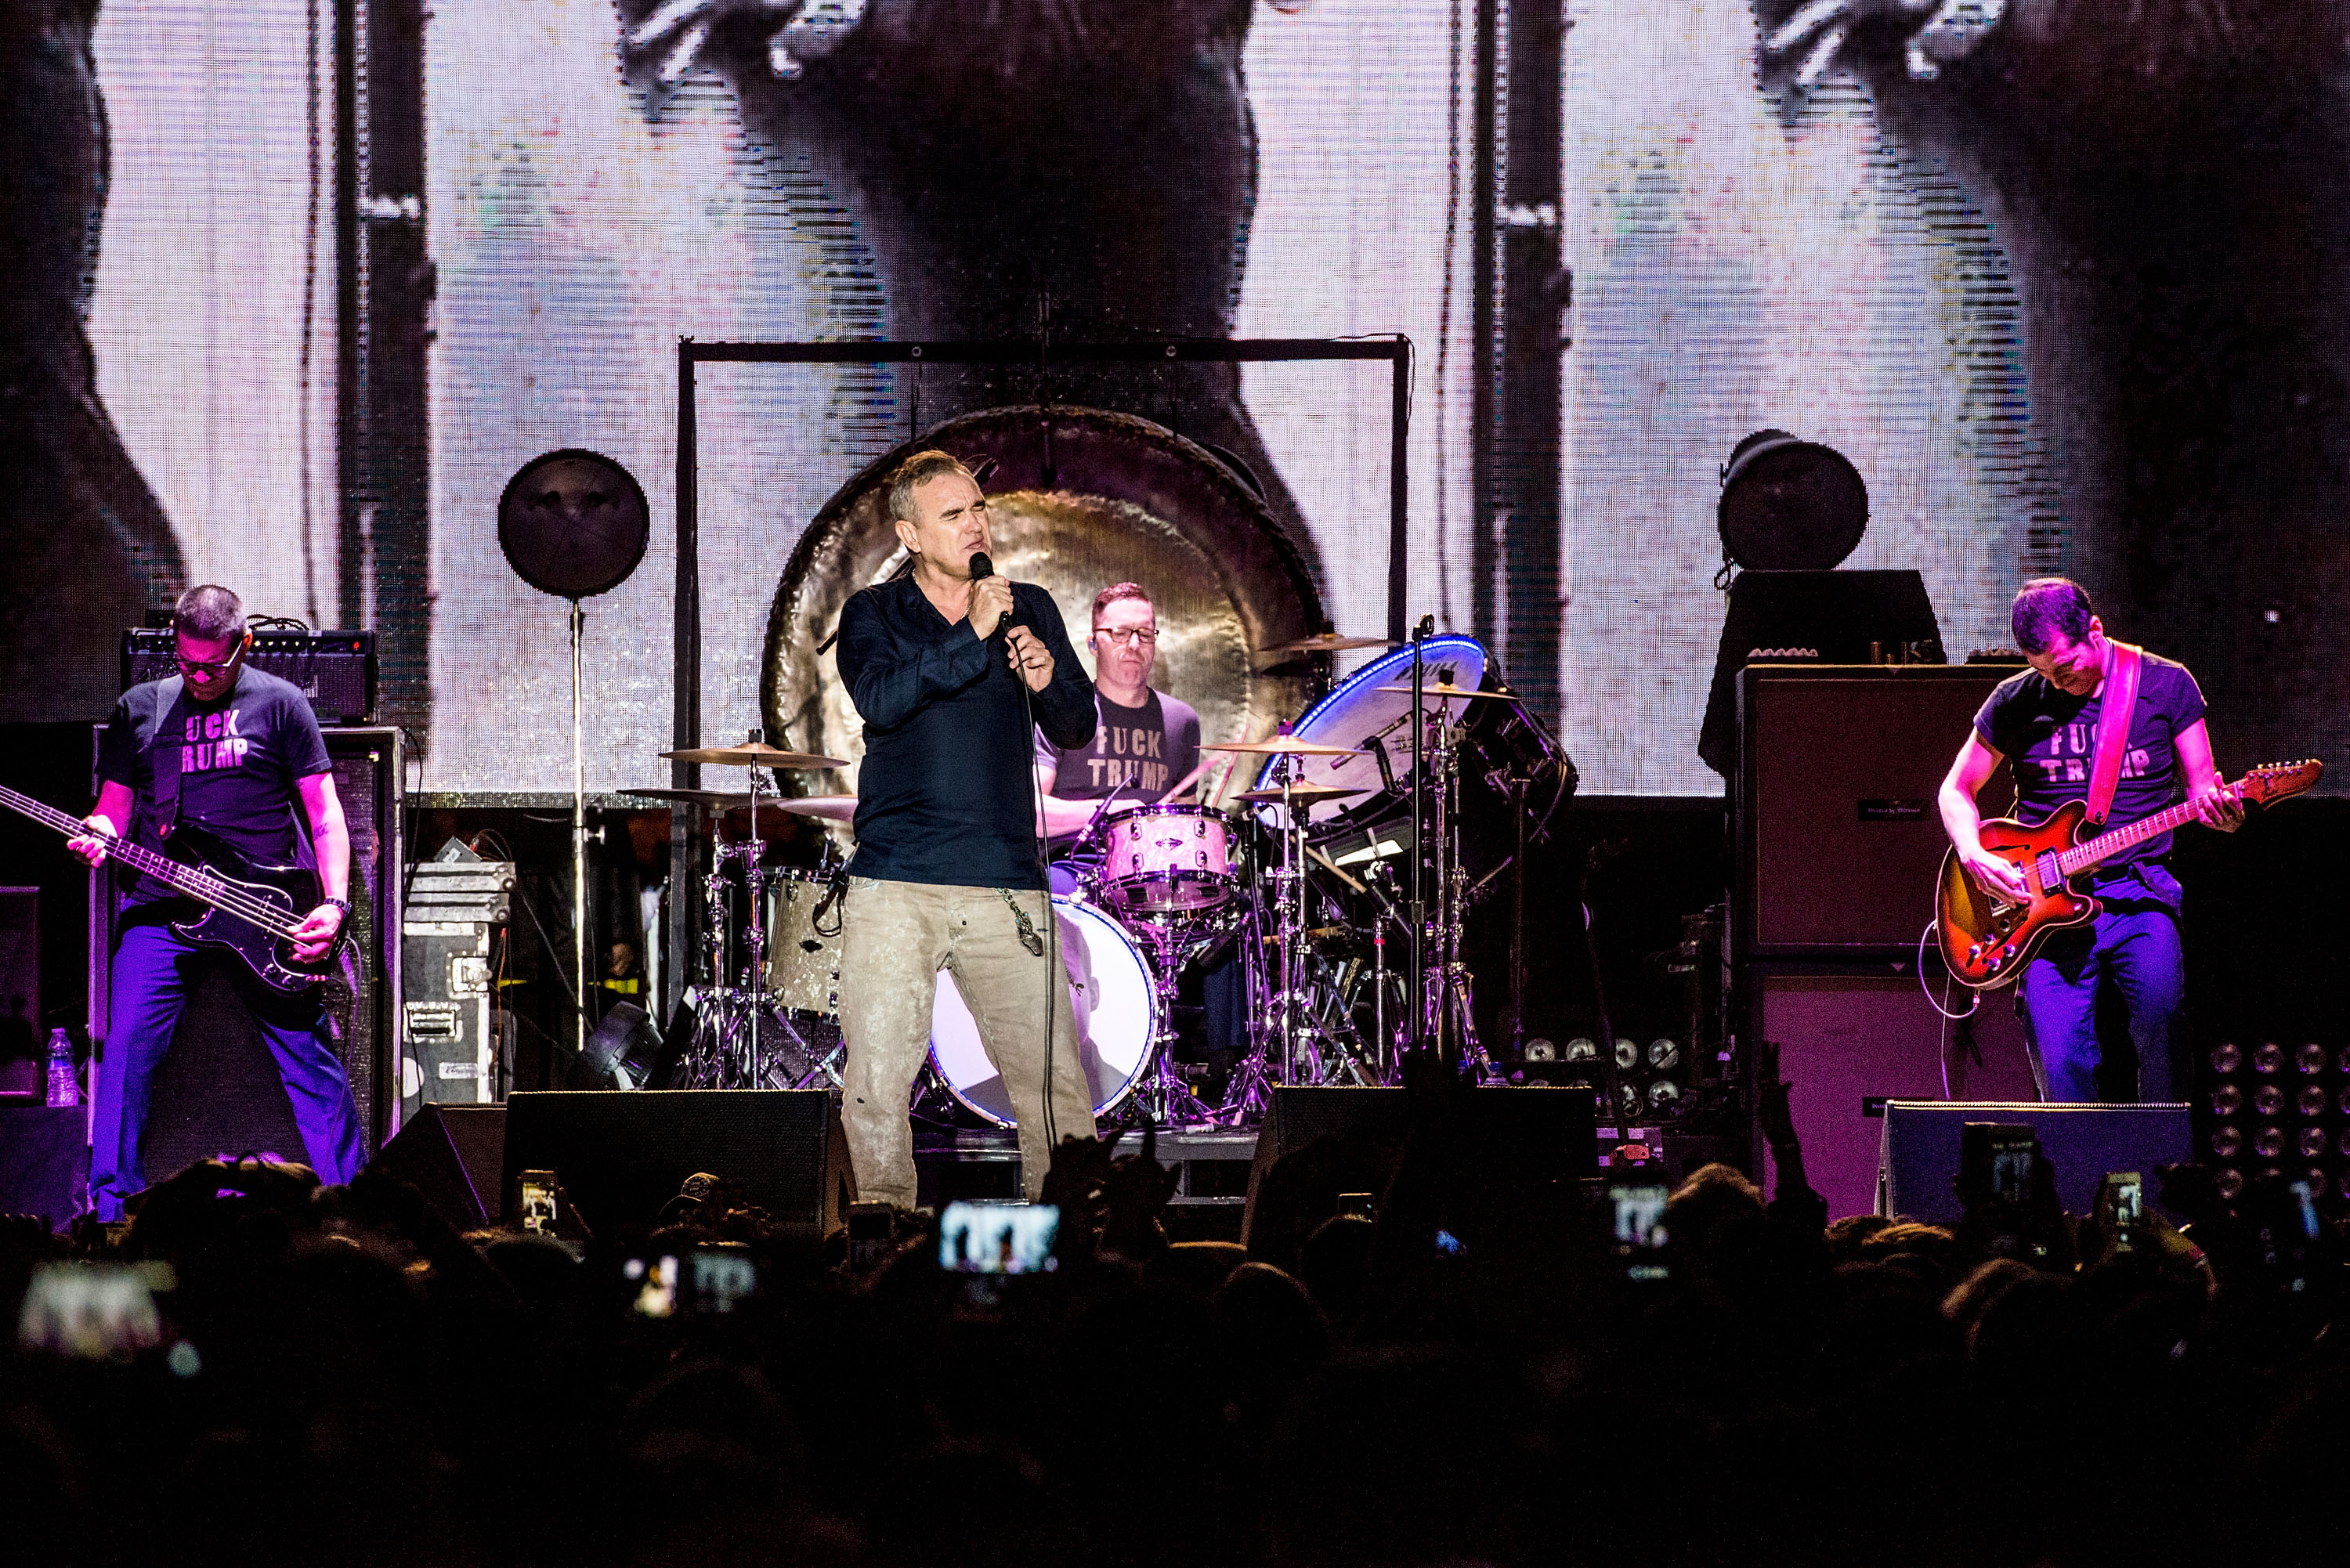 Morrissey Issues Statement on Political Views, Aborted Miley Cyrus Collaboration